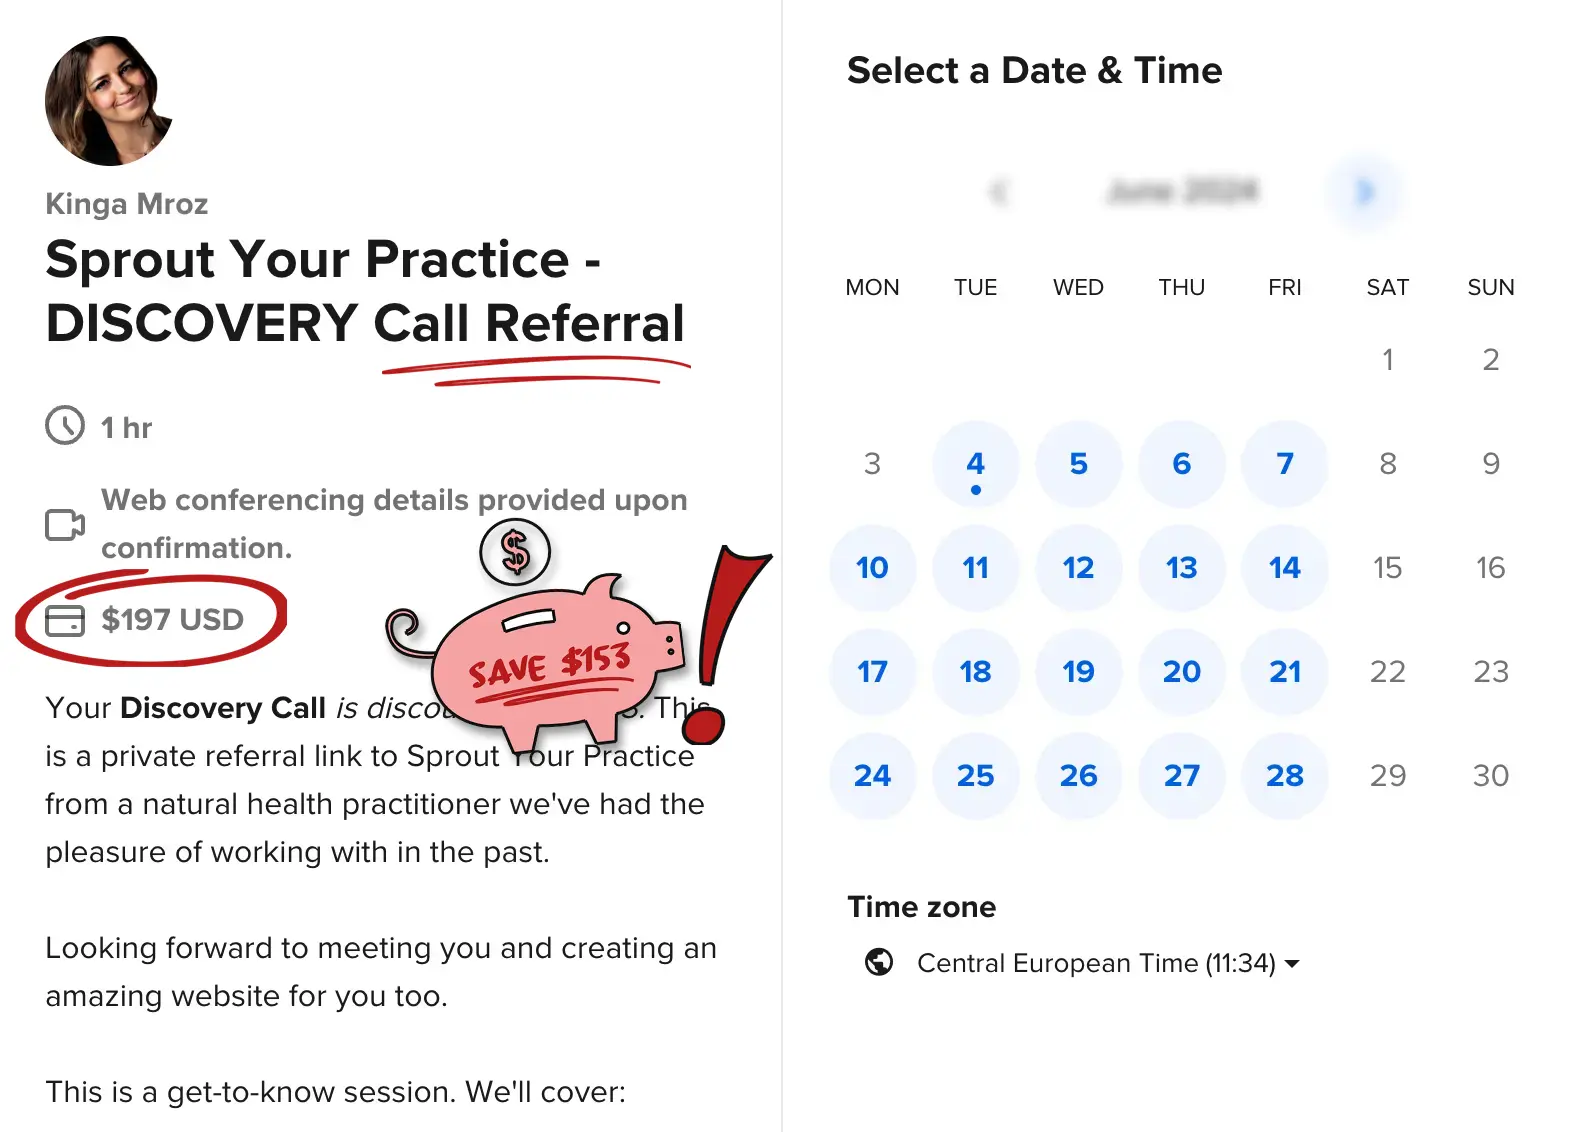 Calendar booking with dates on the left and description on the right Referral is red underlined telling client that there is a $153 discount